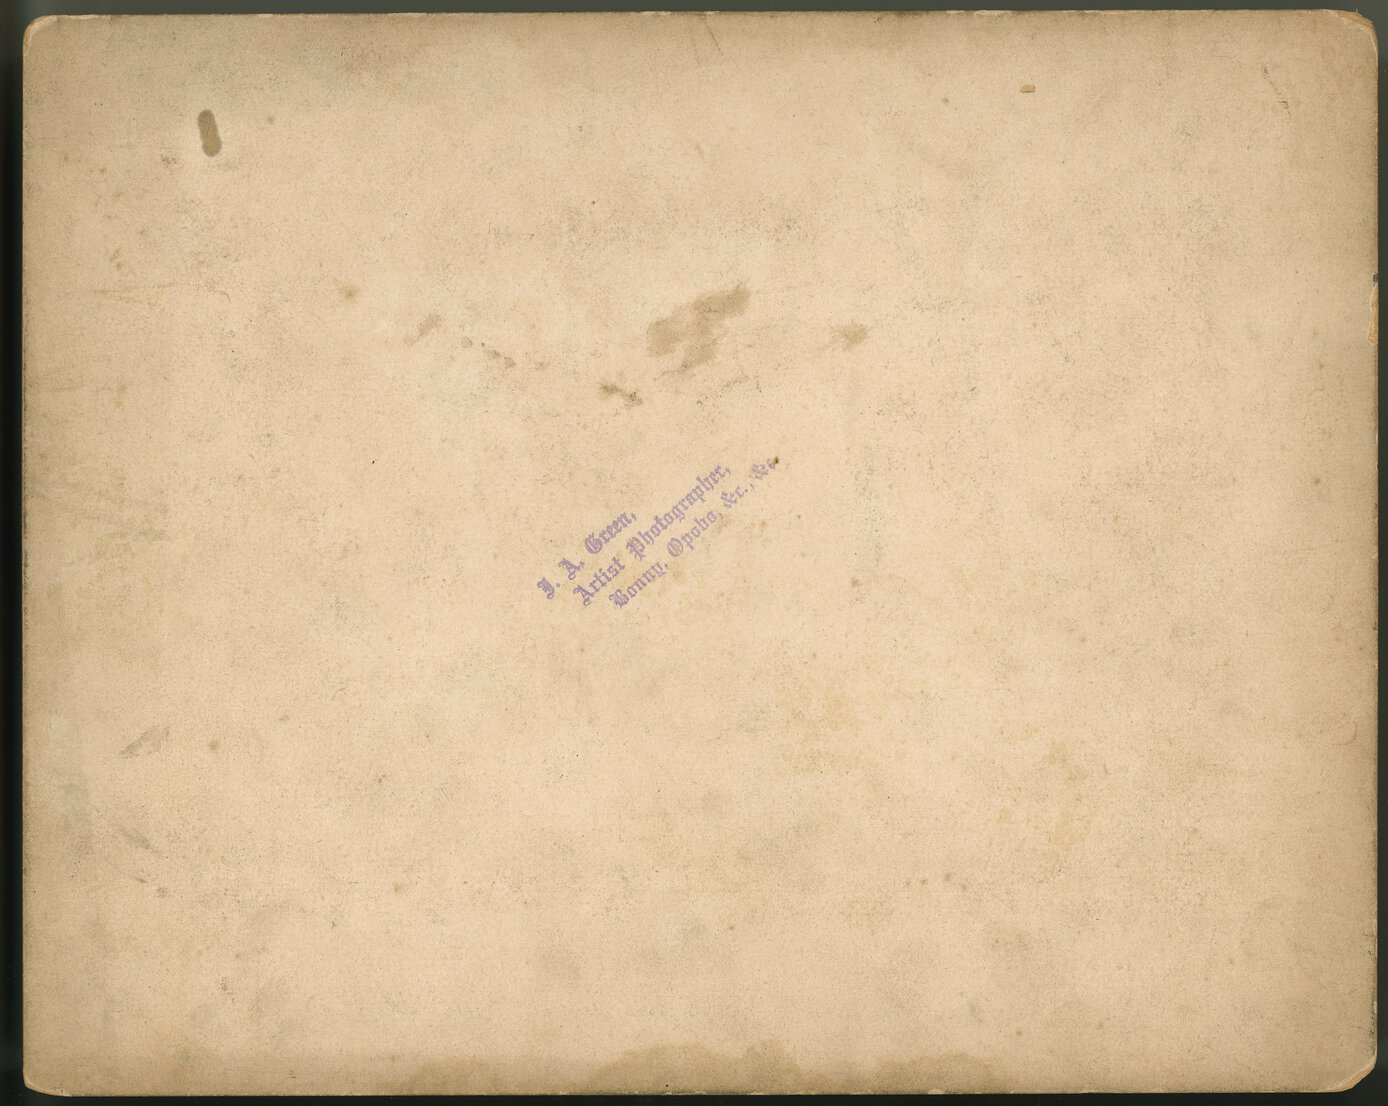 Stained paper with a diagonol purple stamp that says, “J.A. Green, Artist Photographer, Bonny Opobo, &c, &c